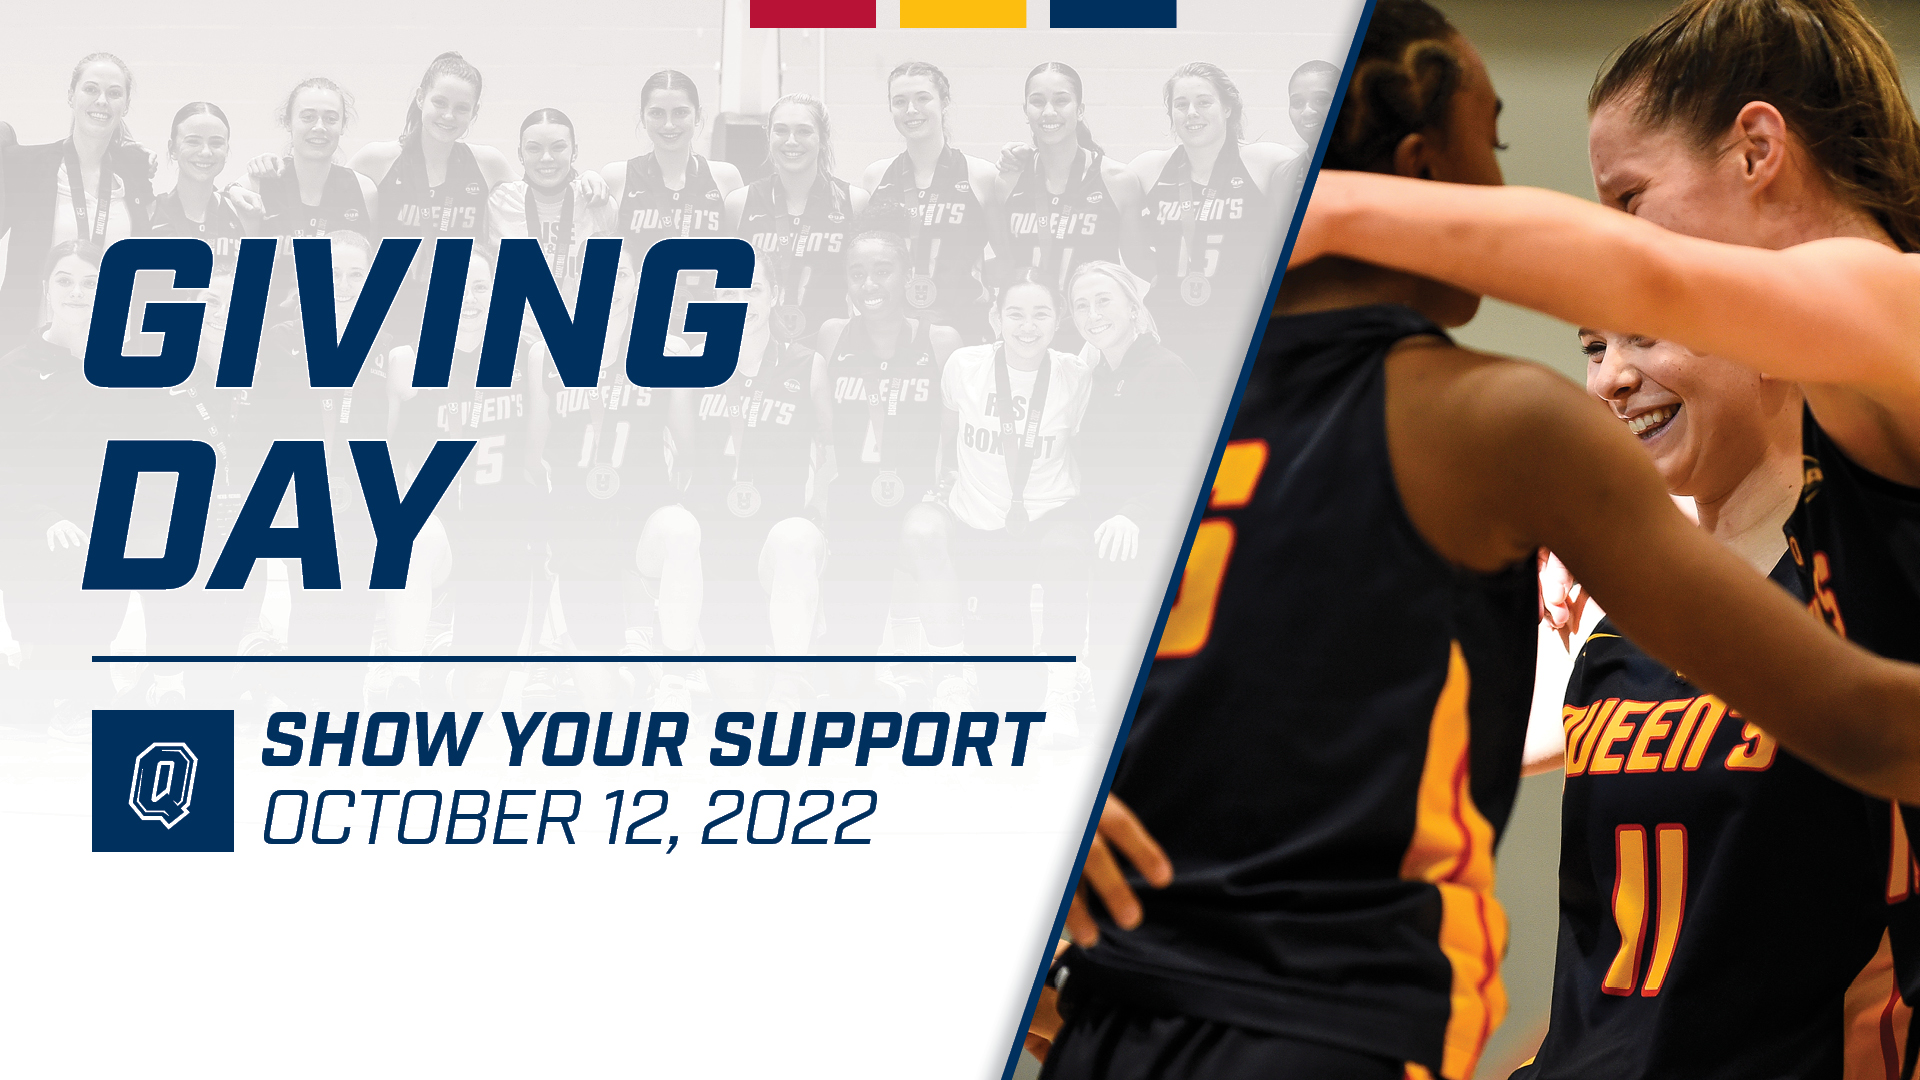 Donate to Giving Day October 12 - Women's Basketball